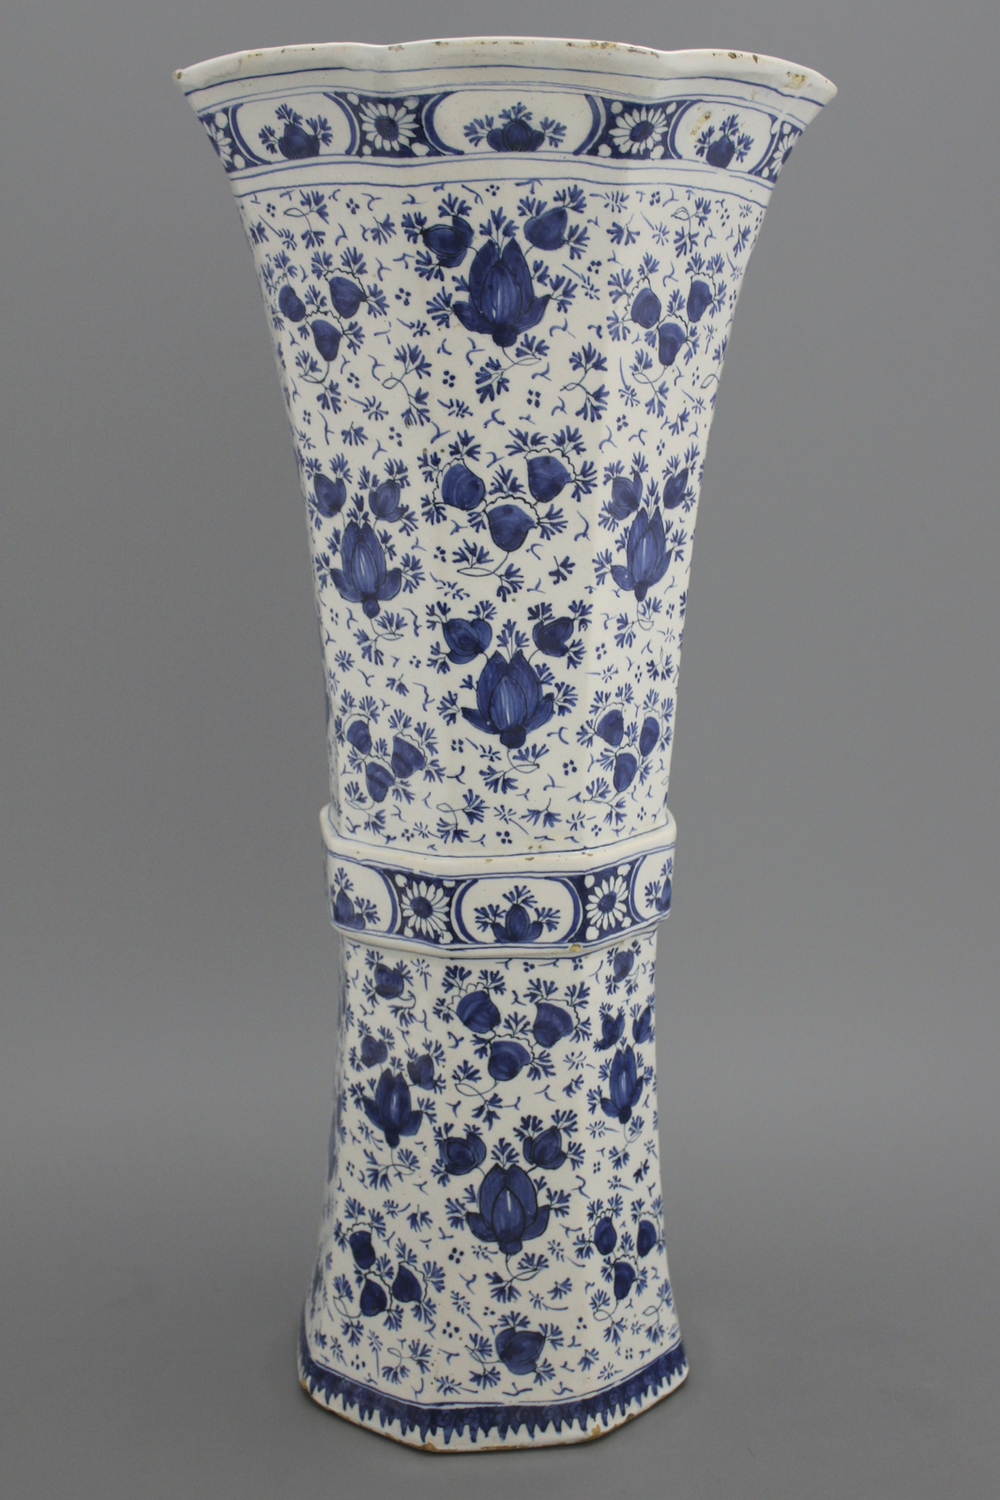 A very large Dutch Delft blue and white vase 18th C.